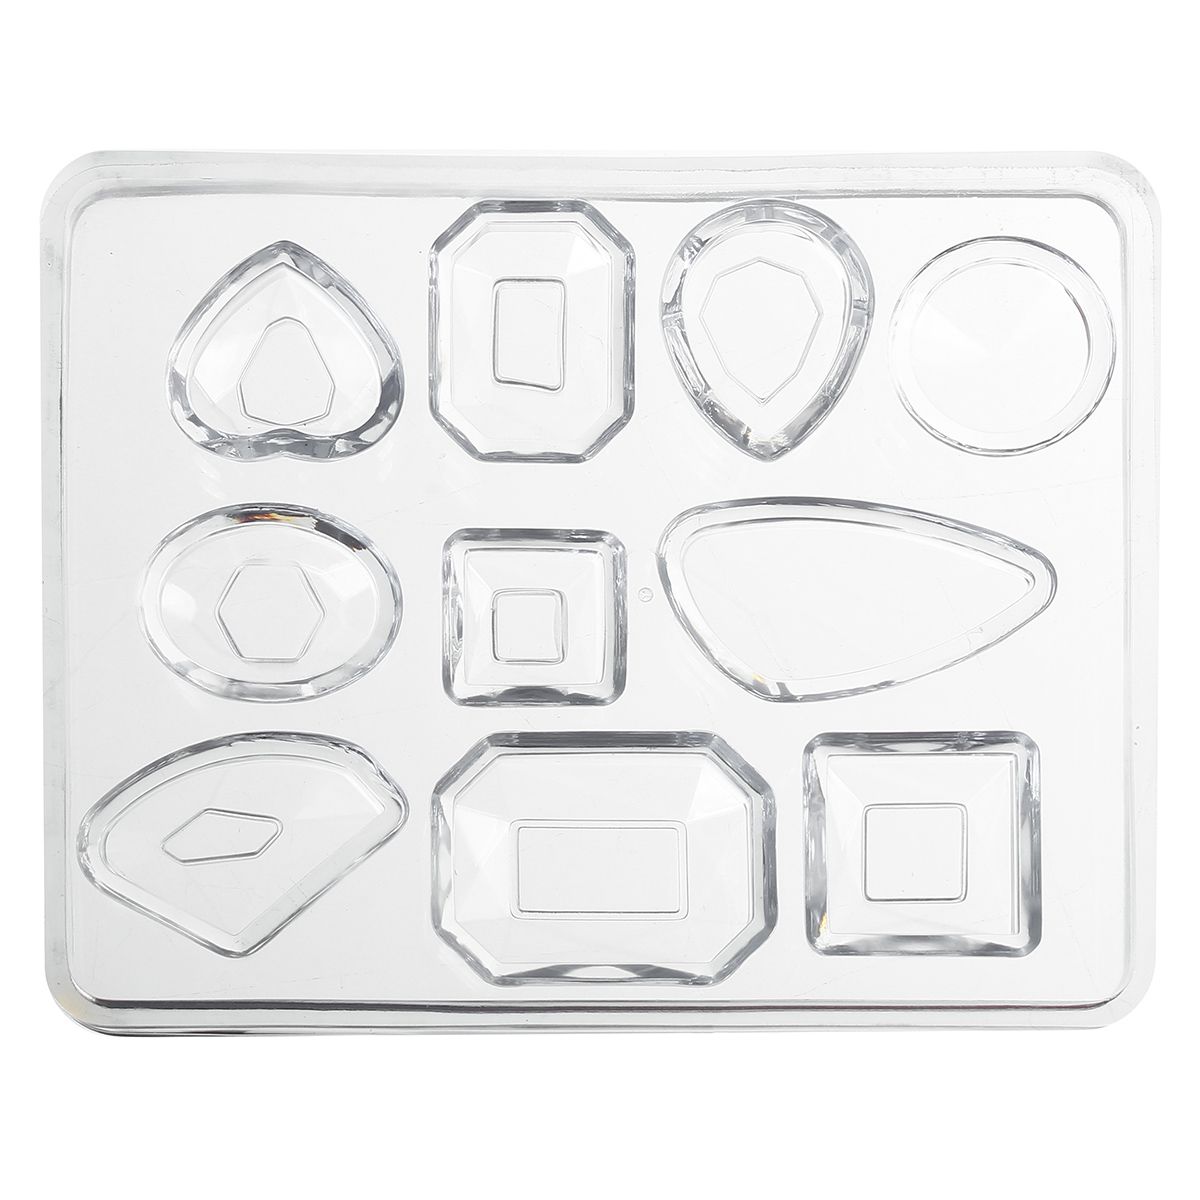 198pcs-Silicone-Mold-Making-Jewelry-Pendant-DIY-Resin-Casting-Craft-Tool-Kit-1739576